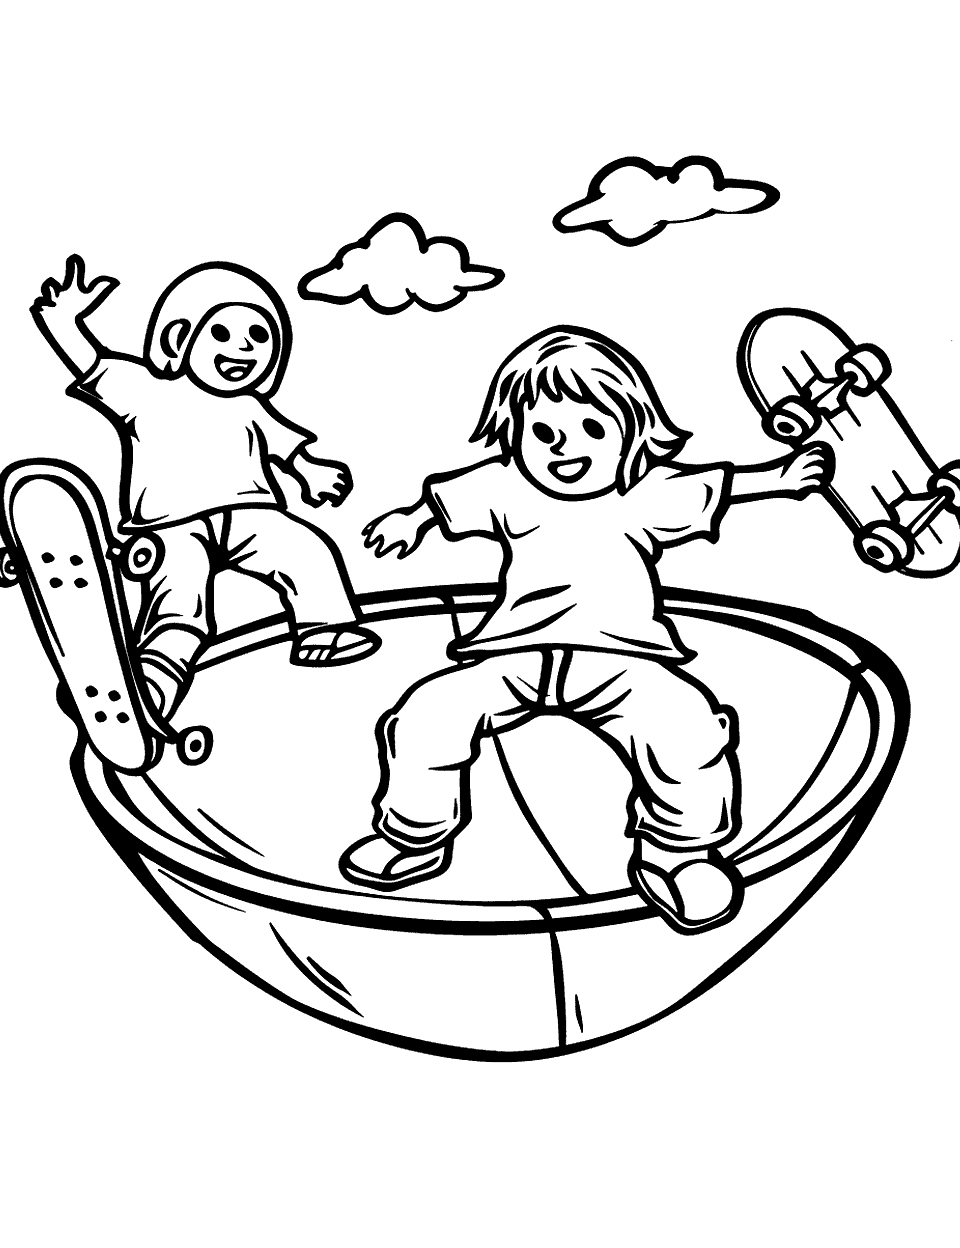 Cool Circle Skate Park Shapes Coloring Page - Kids on skateboards doing tricks in a circular skate bowl.